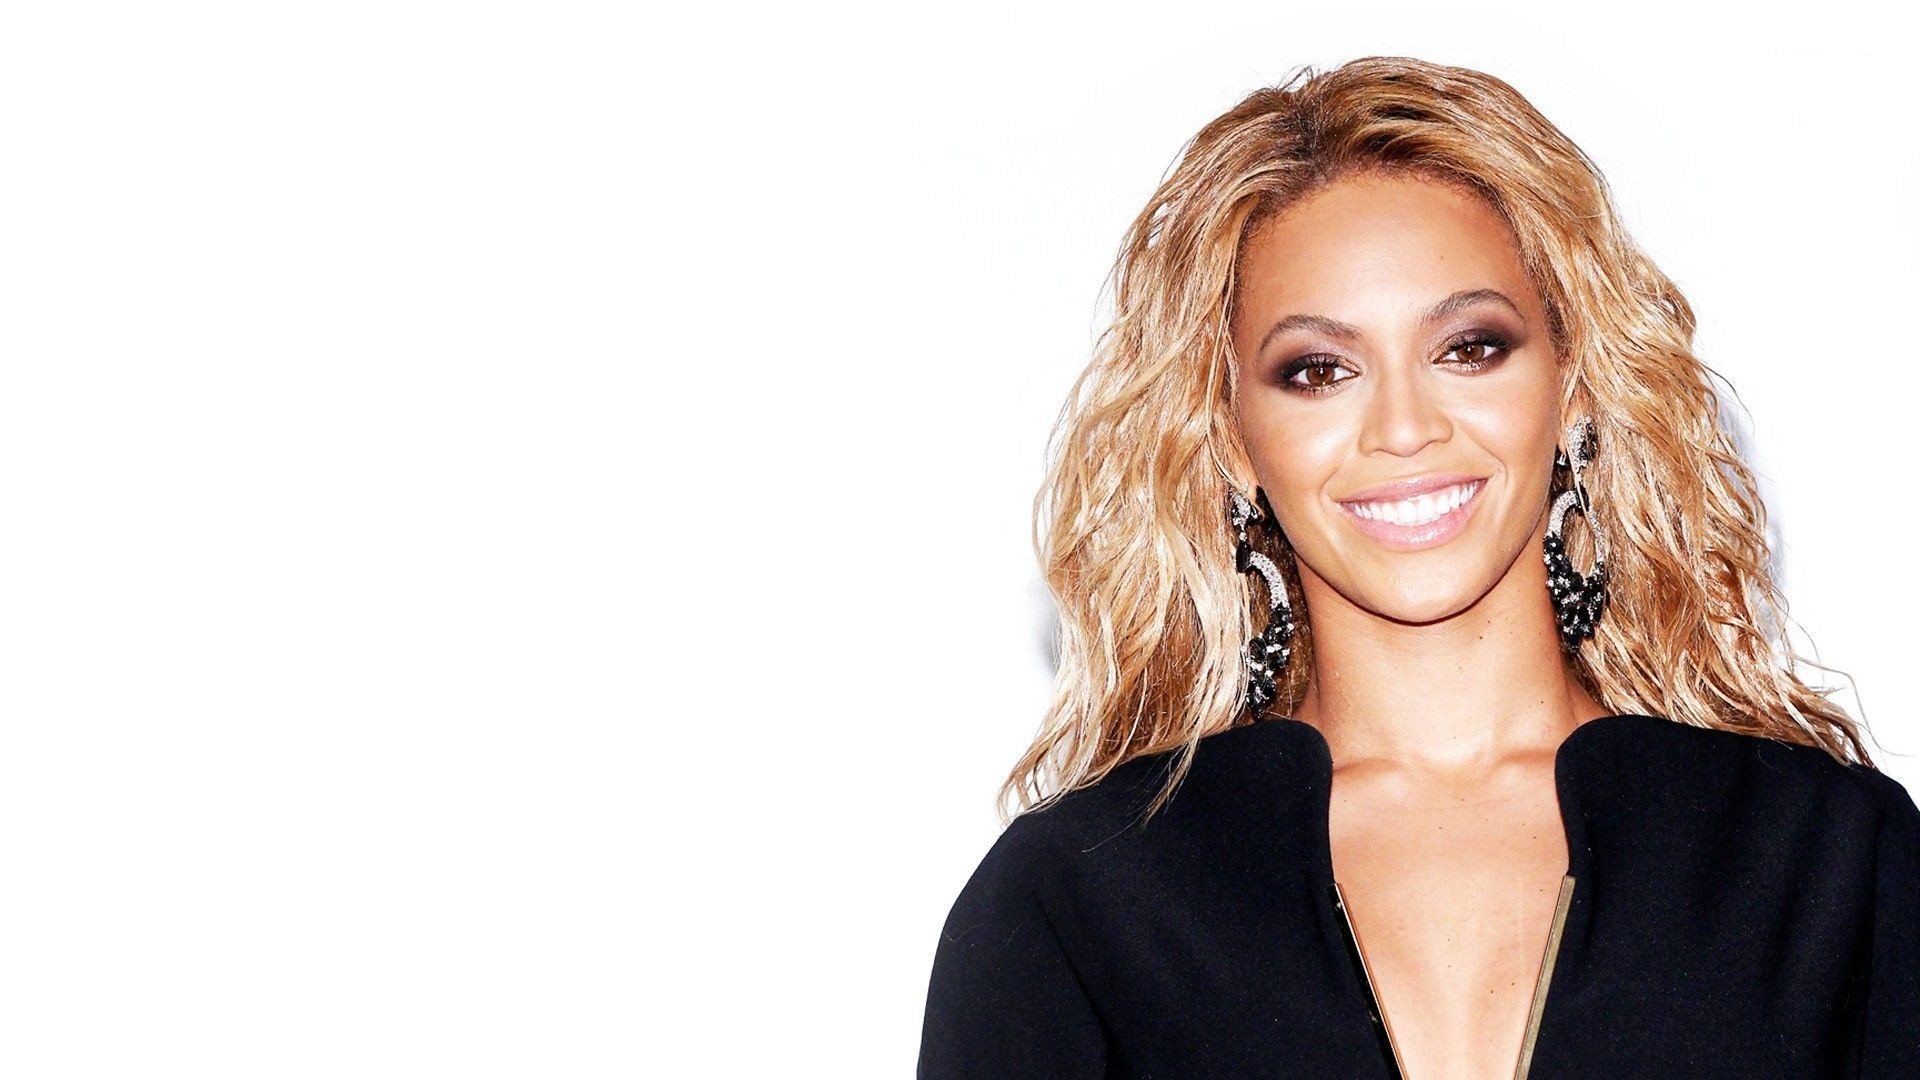 1920x1080 beyonce pic - Full HD Backgrounds, 1920 x 1080 (201 kB)